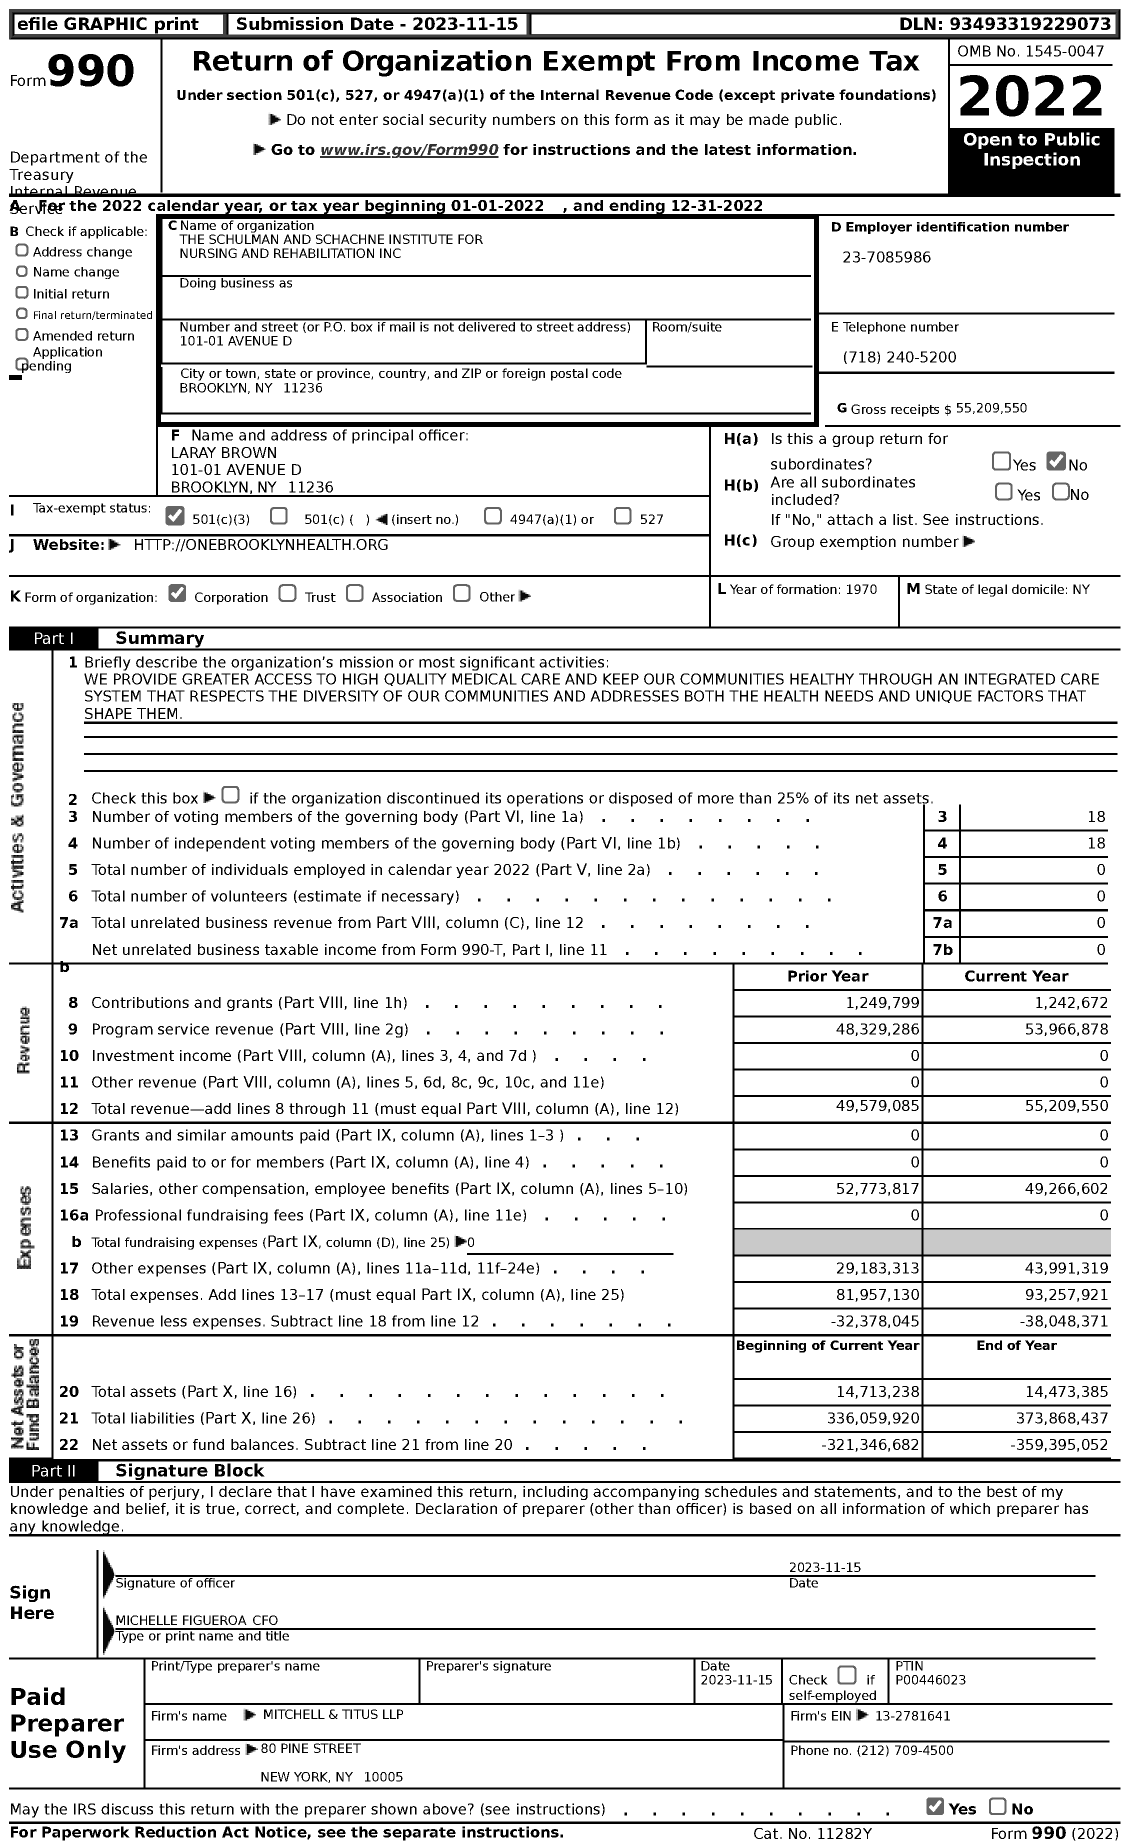 Image of first page of 2022 Form 990 for The Schulman and Schachne Institute for Nursing and Rehabilitation